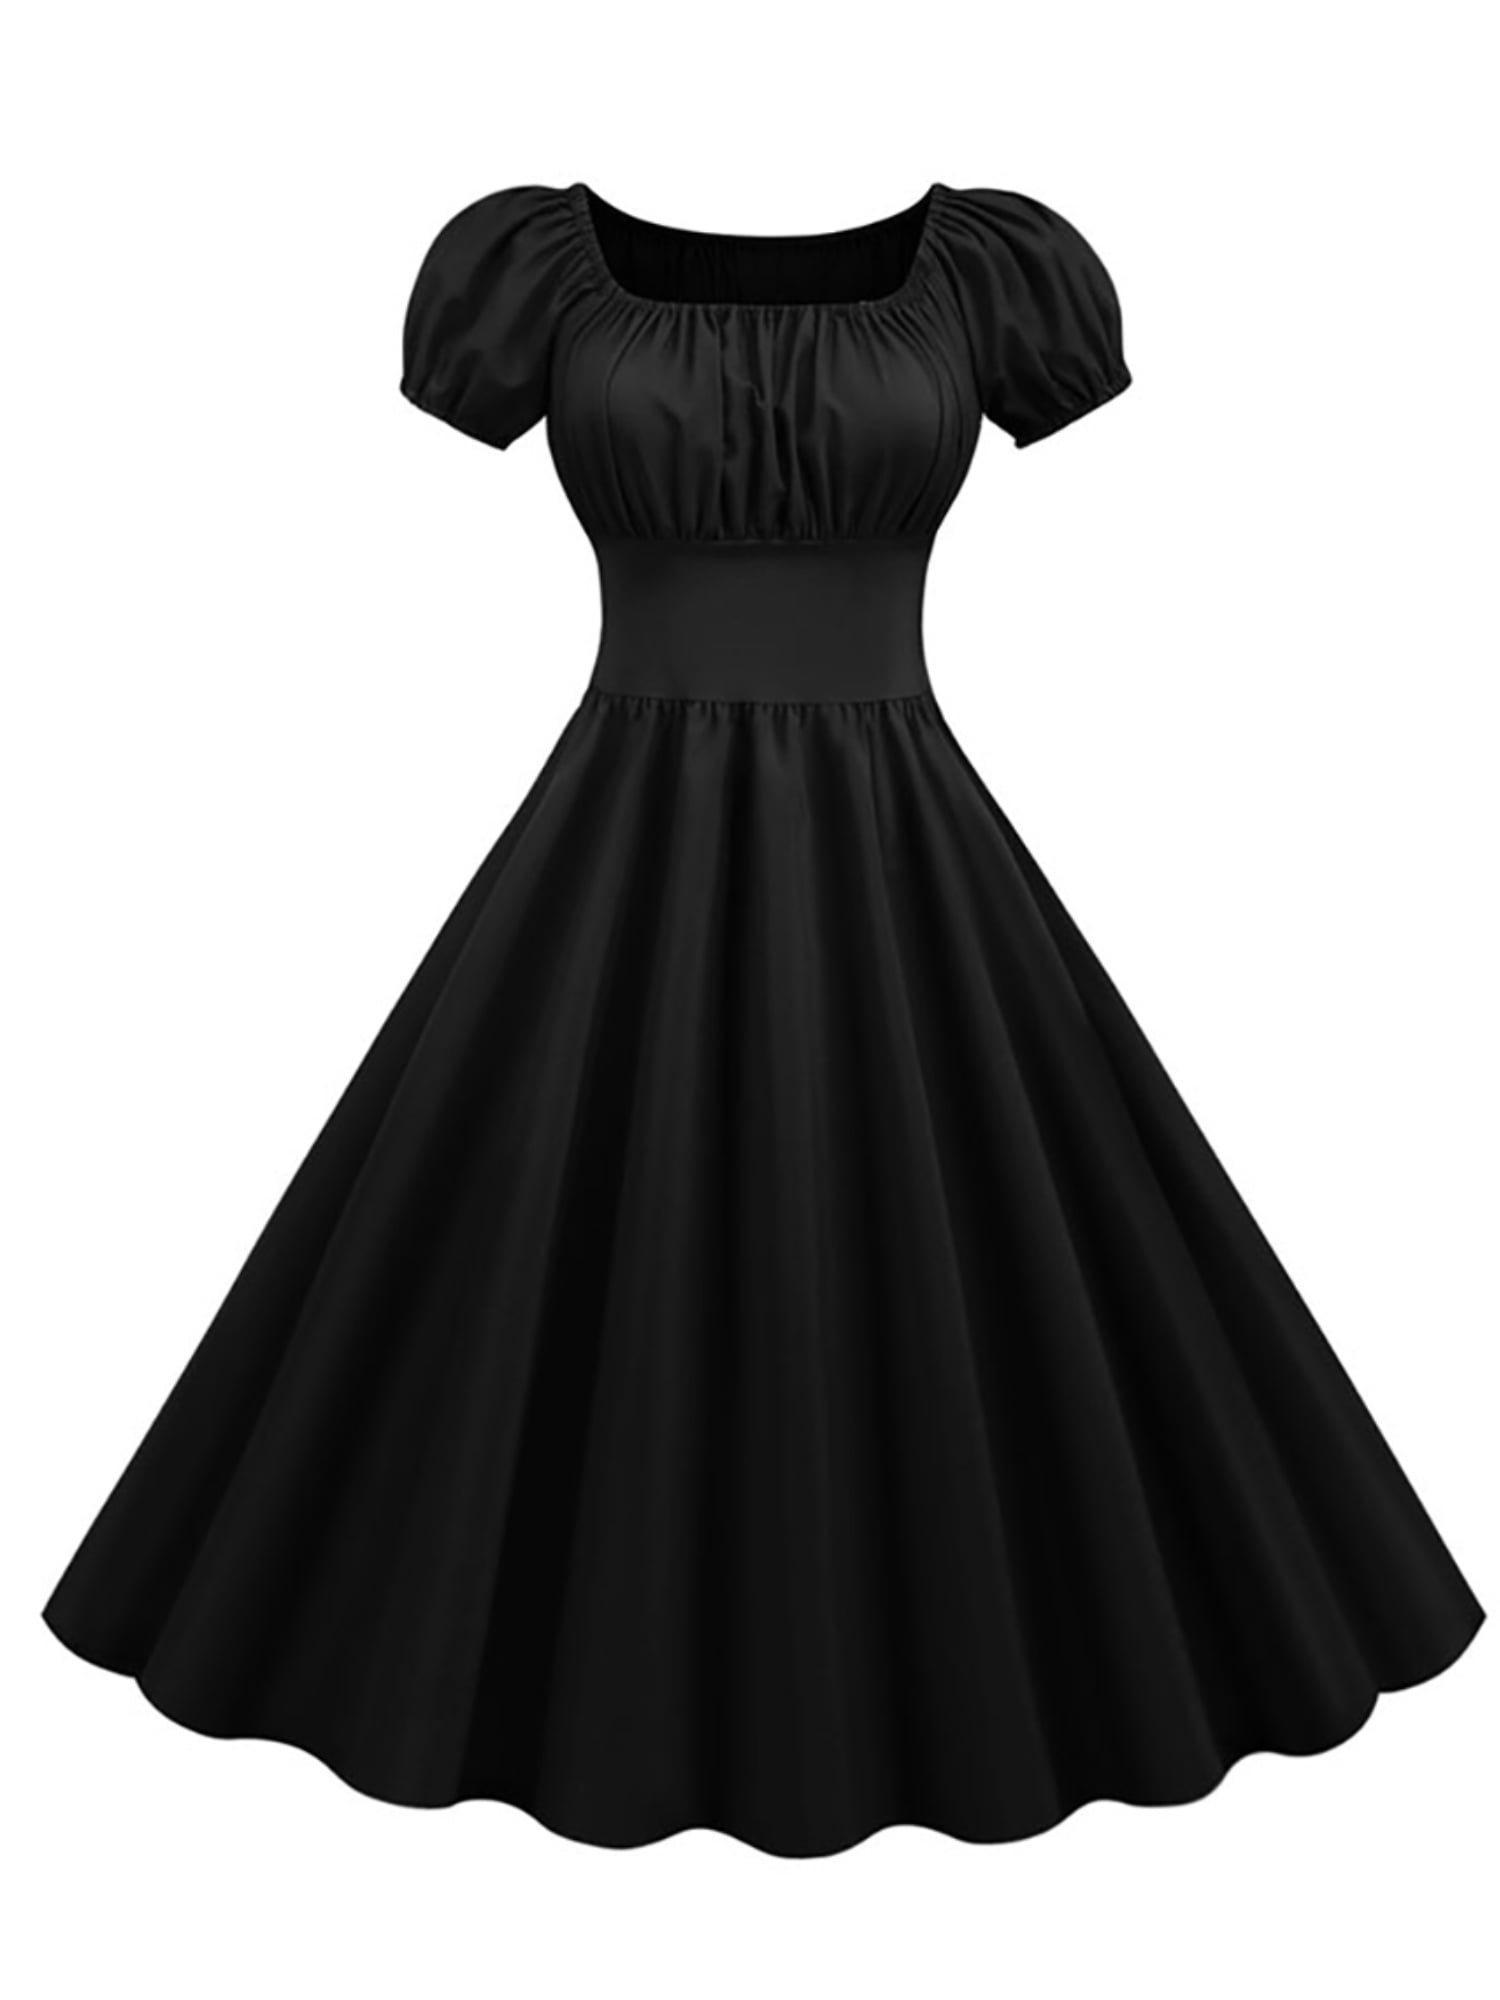 Women Vintage Rockabilly Swing Skater Dress Evening Party Cocktail Bridal Gown 